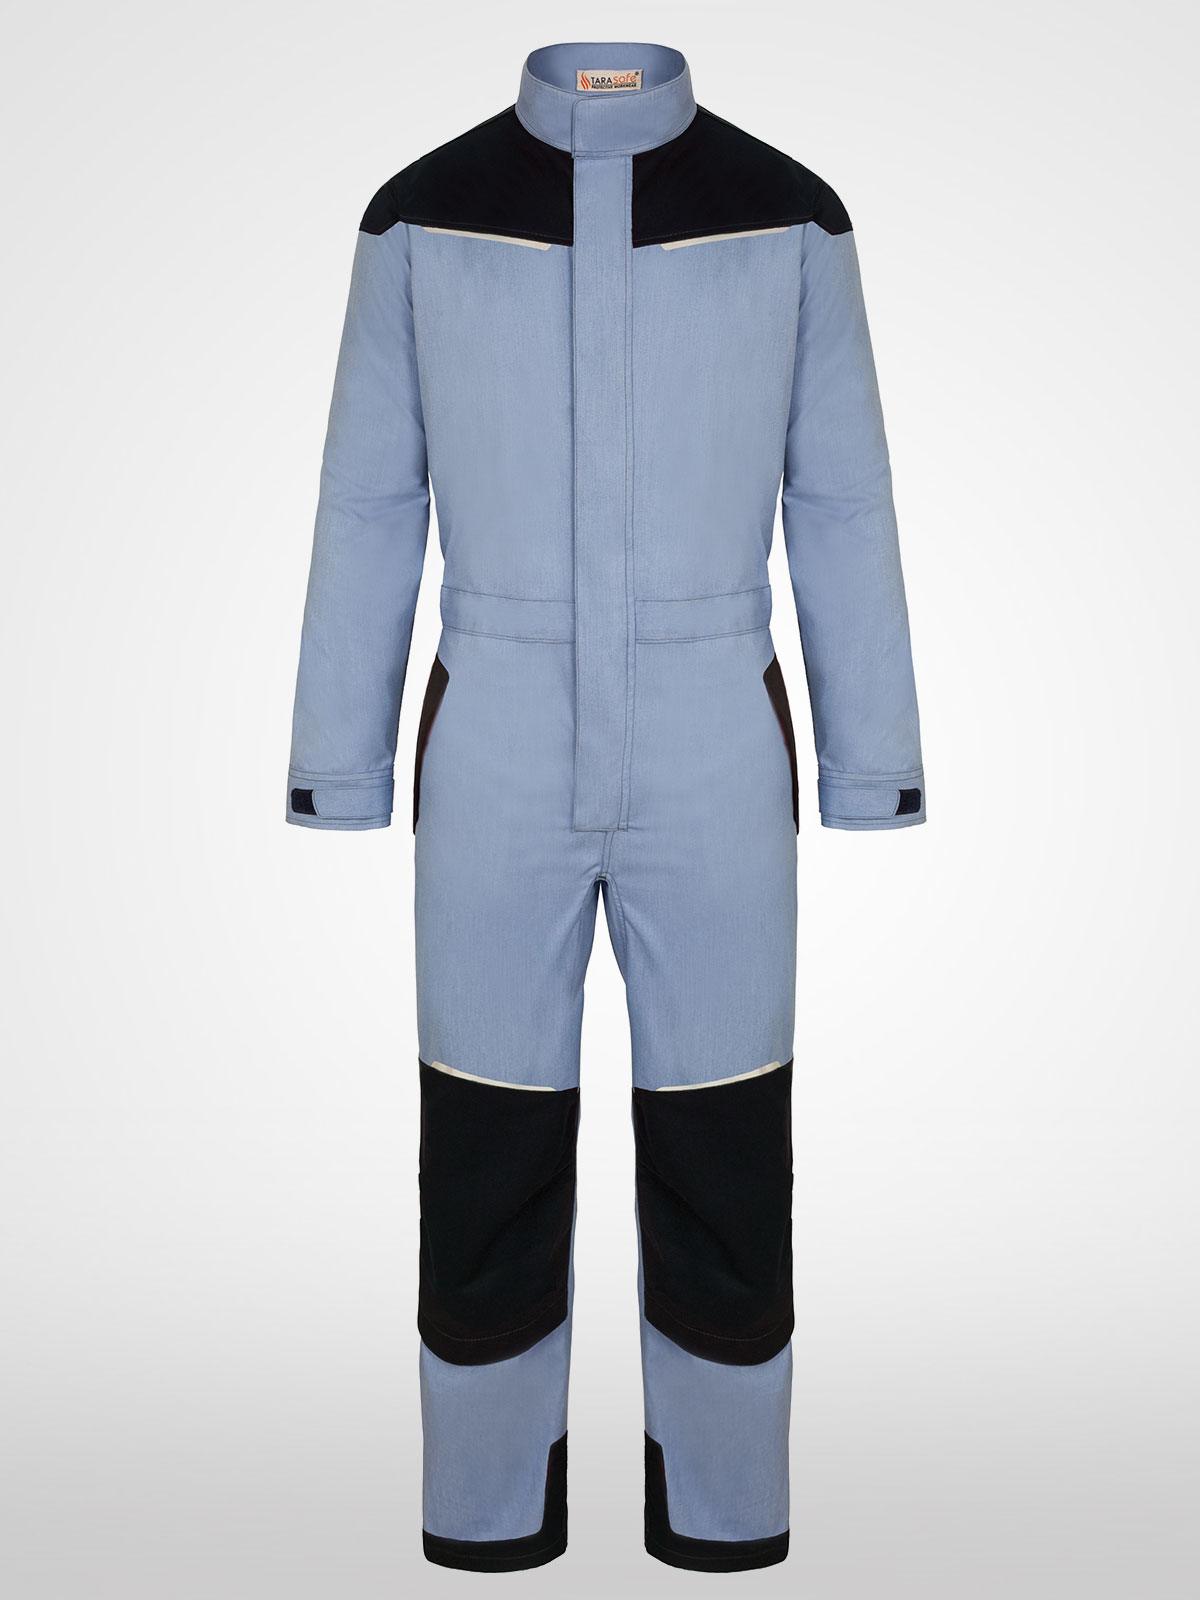 Tarasafe offers Flame resistant coveralls for fire hazardous industries ...